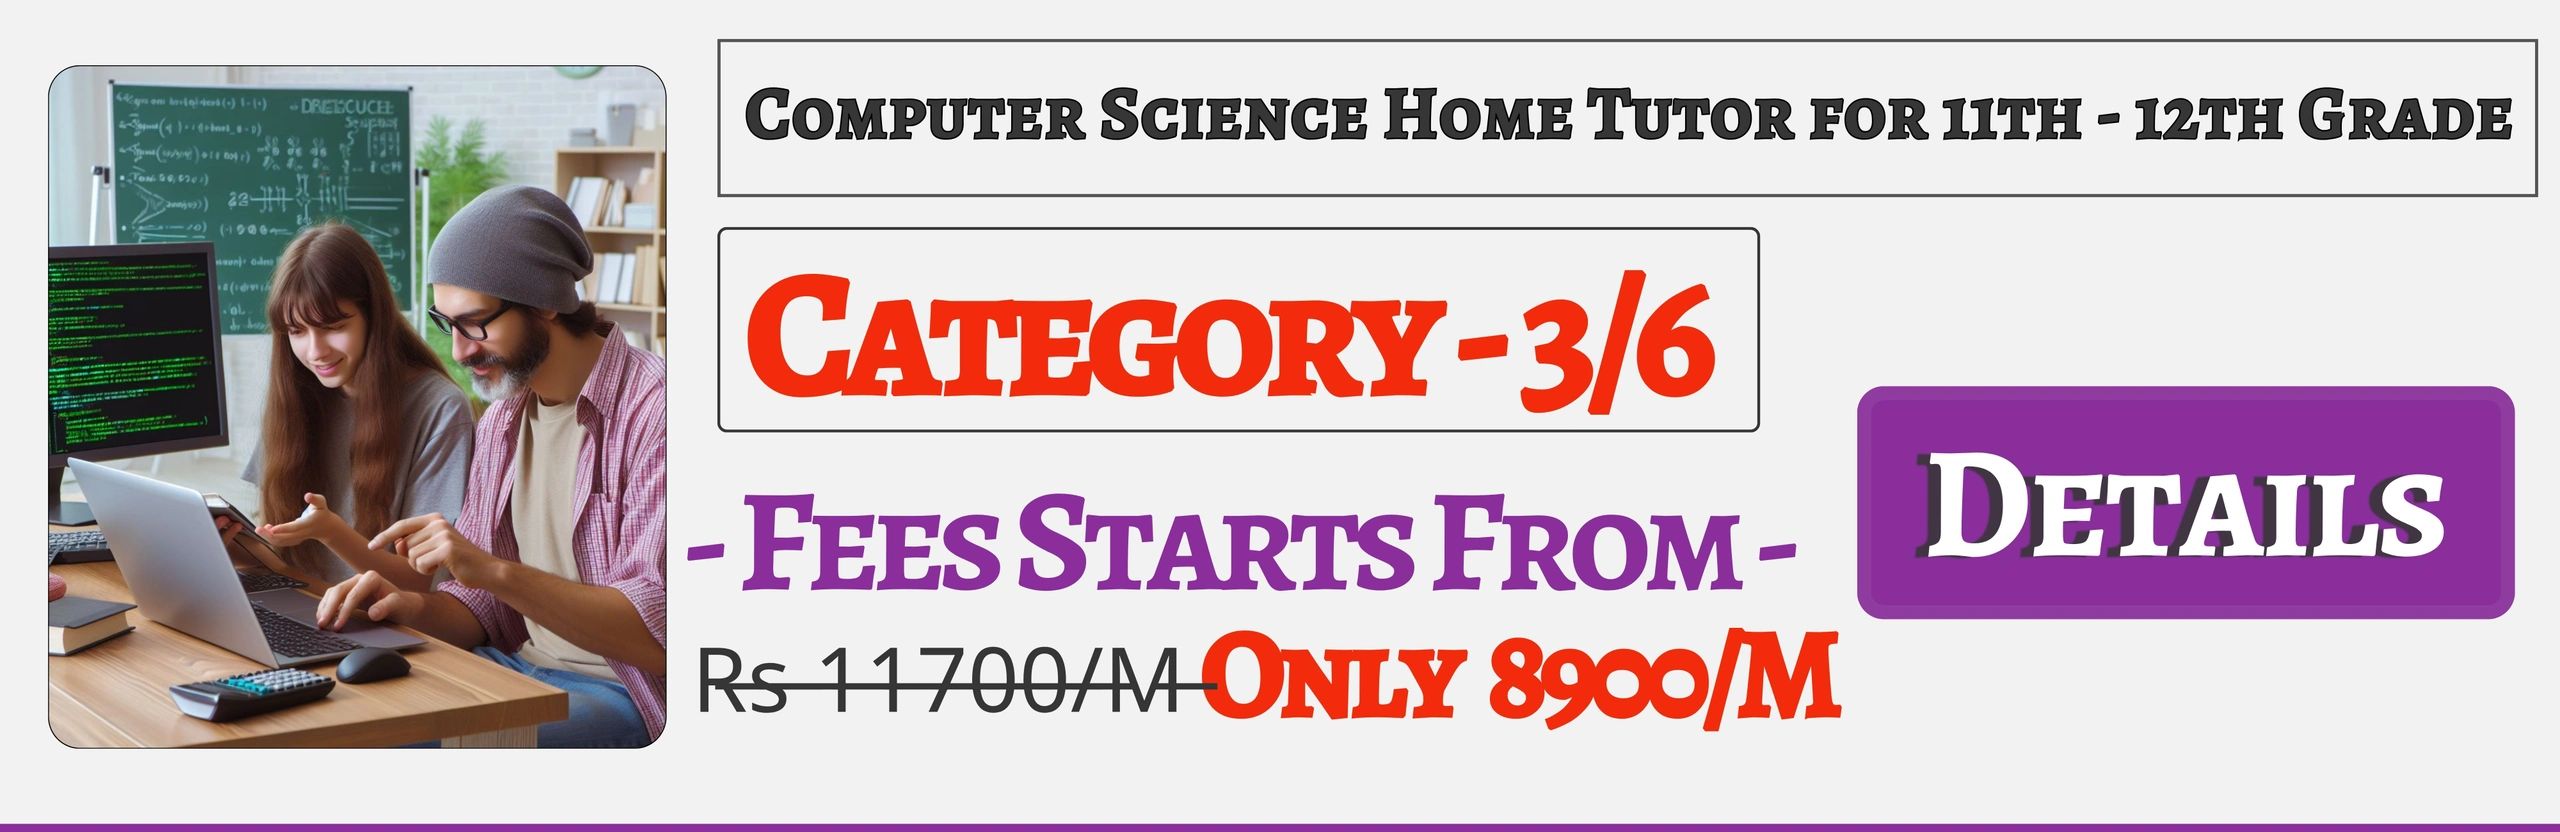 Book Best Nearby Computer Science Home Tuition Tutors For 11th & 12th In Jaipur , Fees Only 8900/M